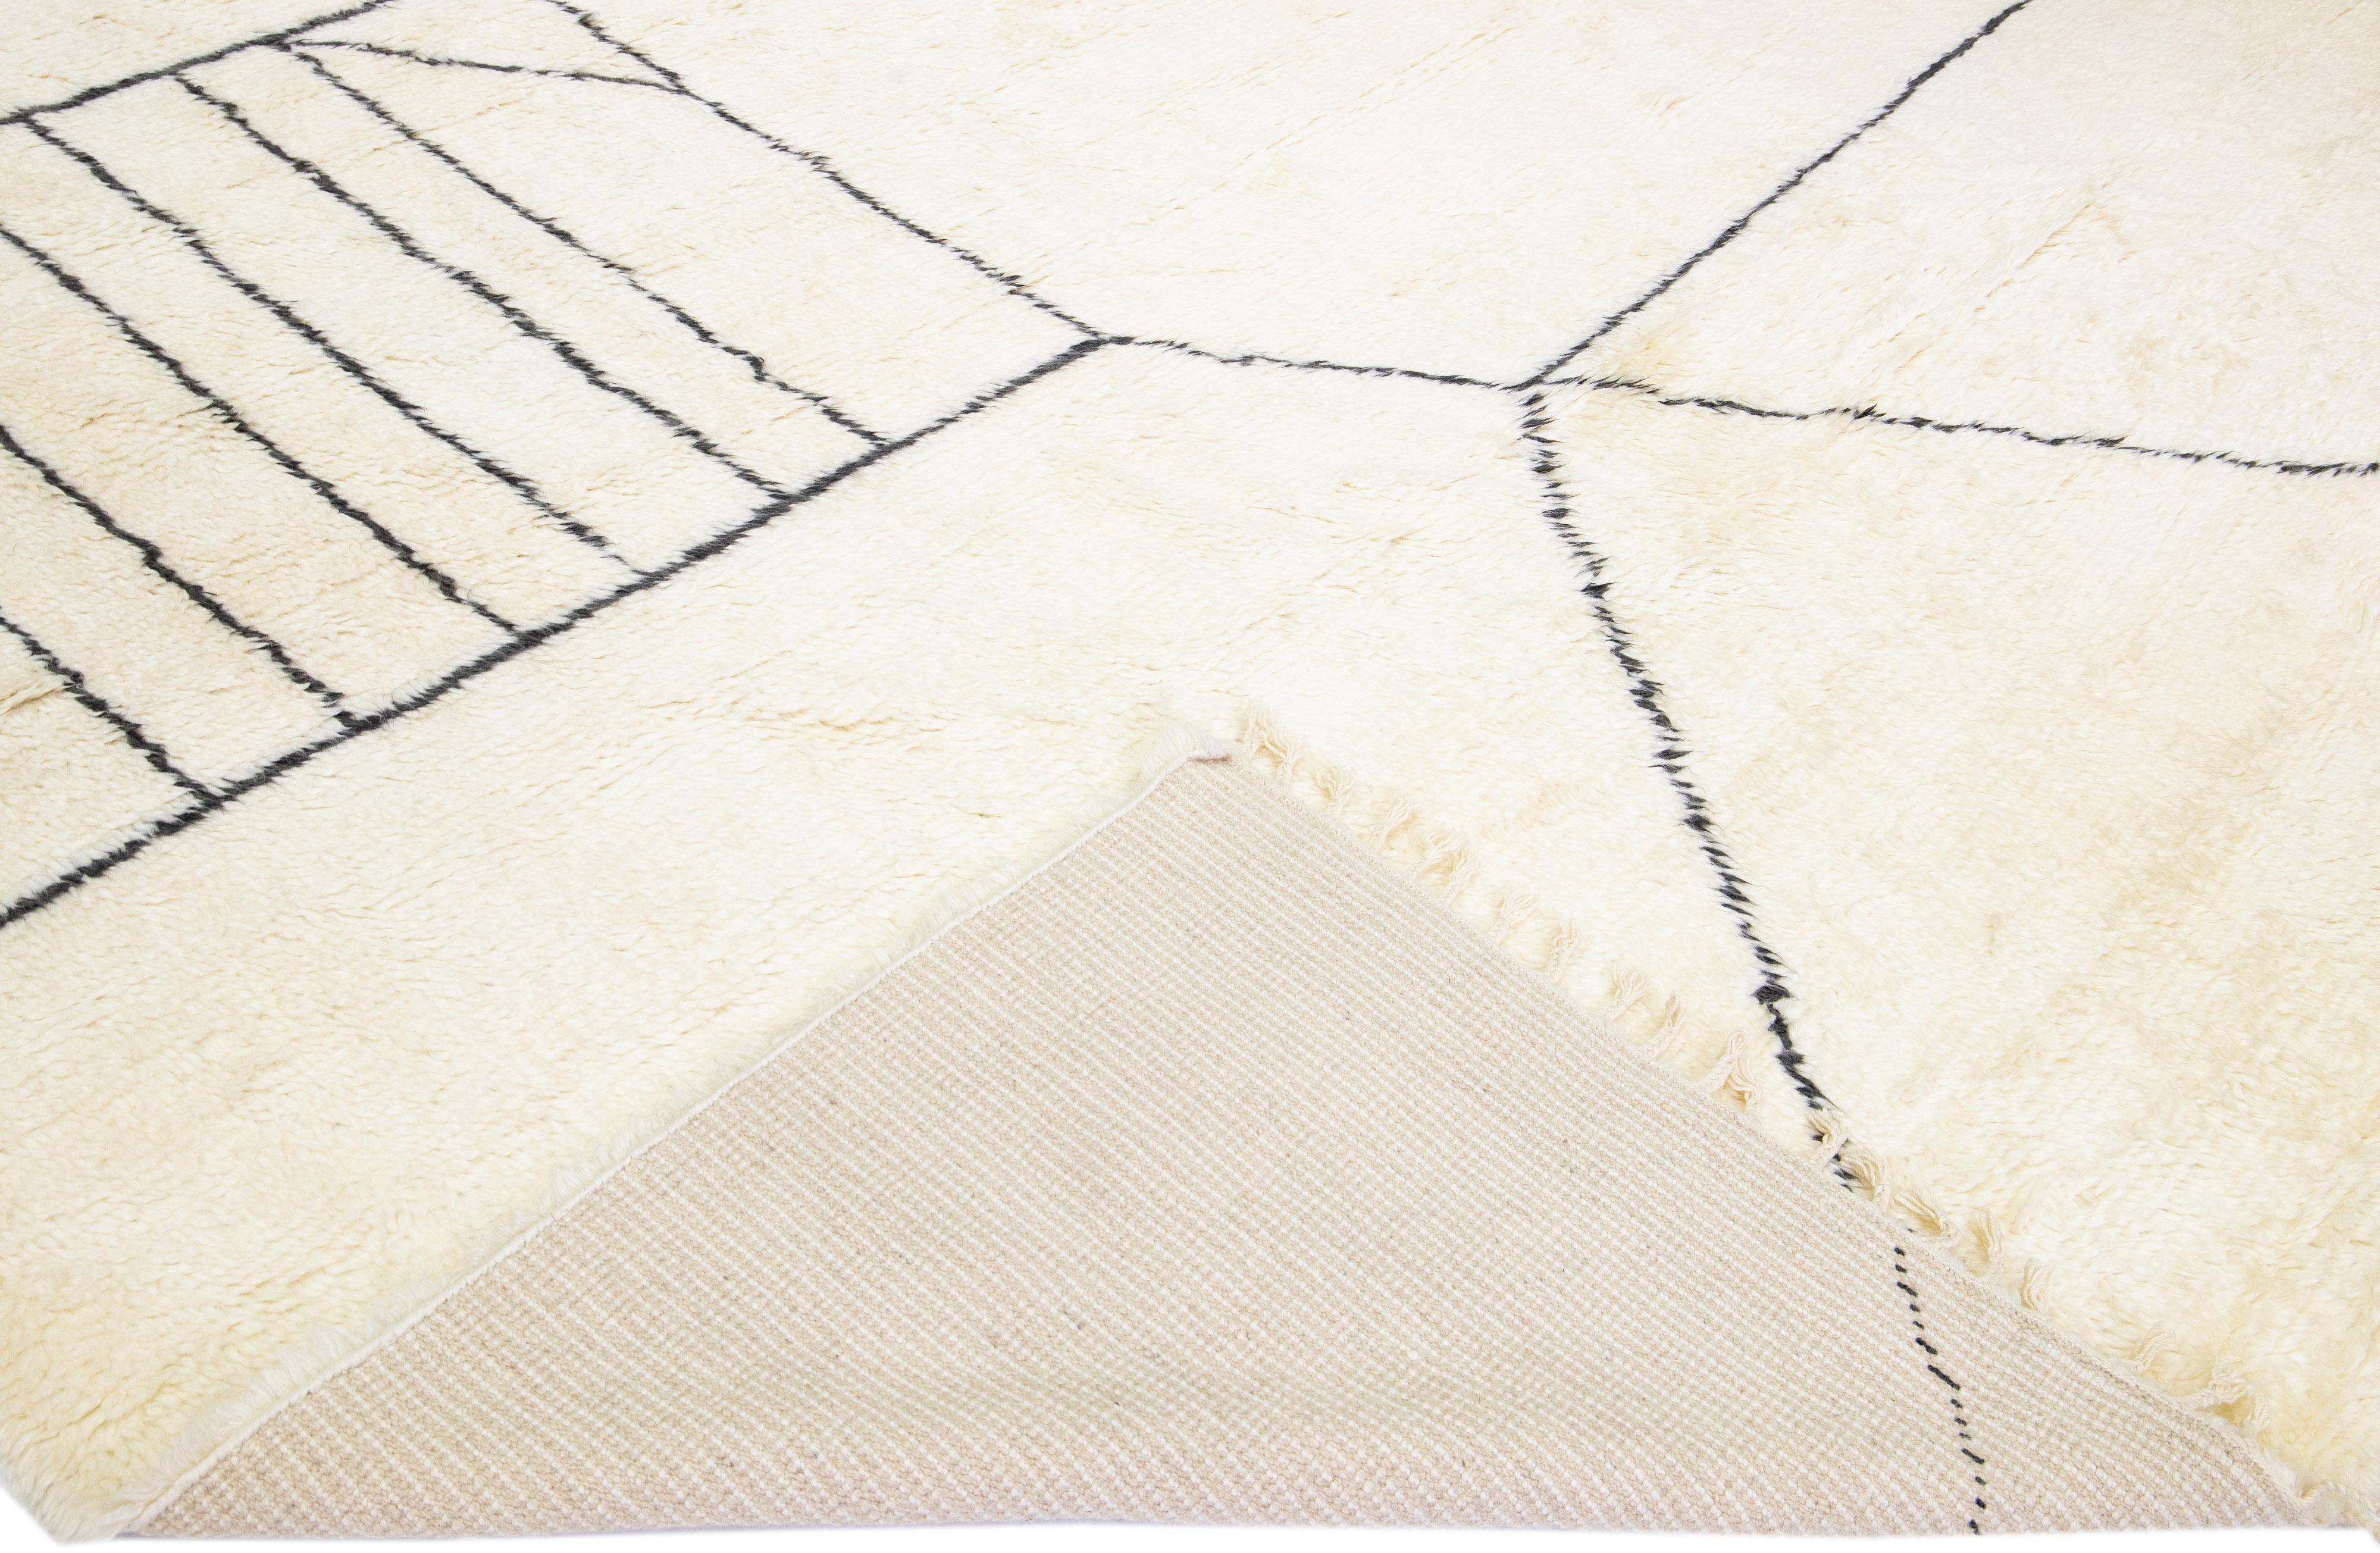 Beautiful modern Moroccan style hand-knotted wool rug with a white field and fringes in a gorgeous geometric abstract high pile design.

This rug measures: 12'1